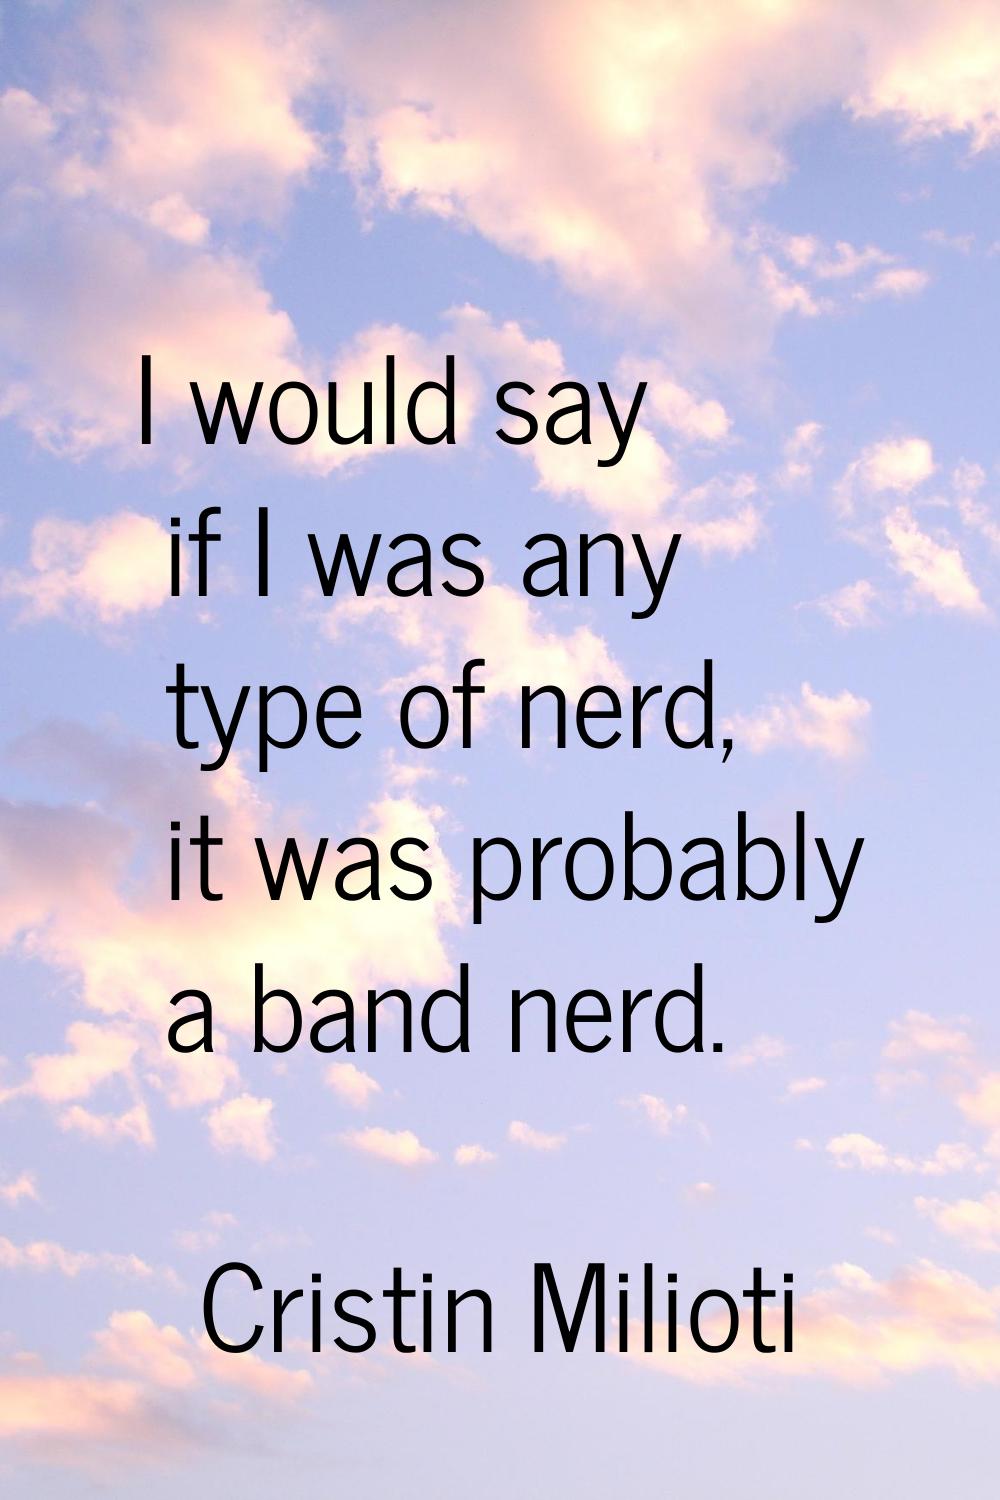 I would say if I was any type of nerd, it was probably a band nerd.